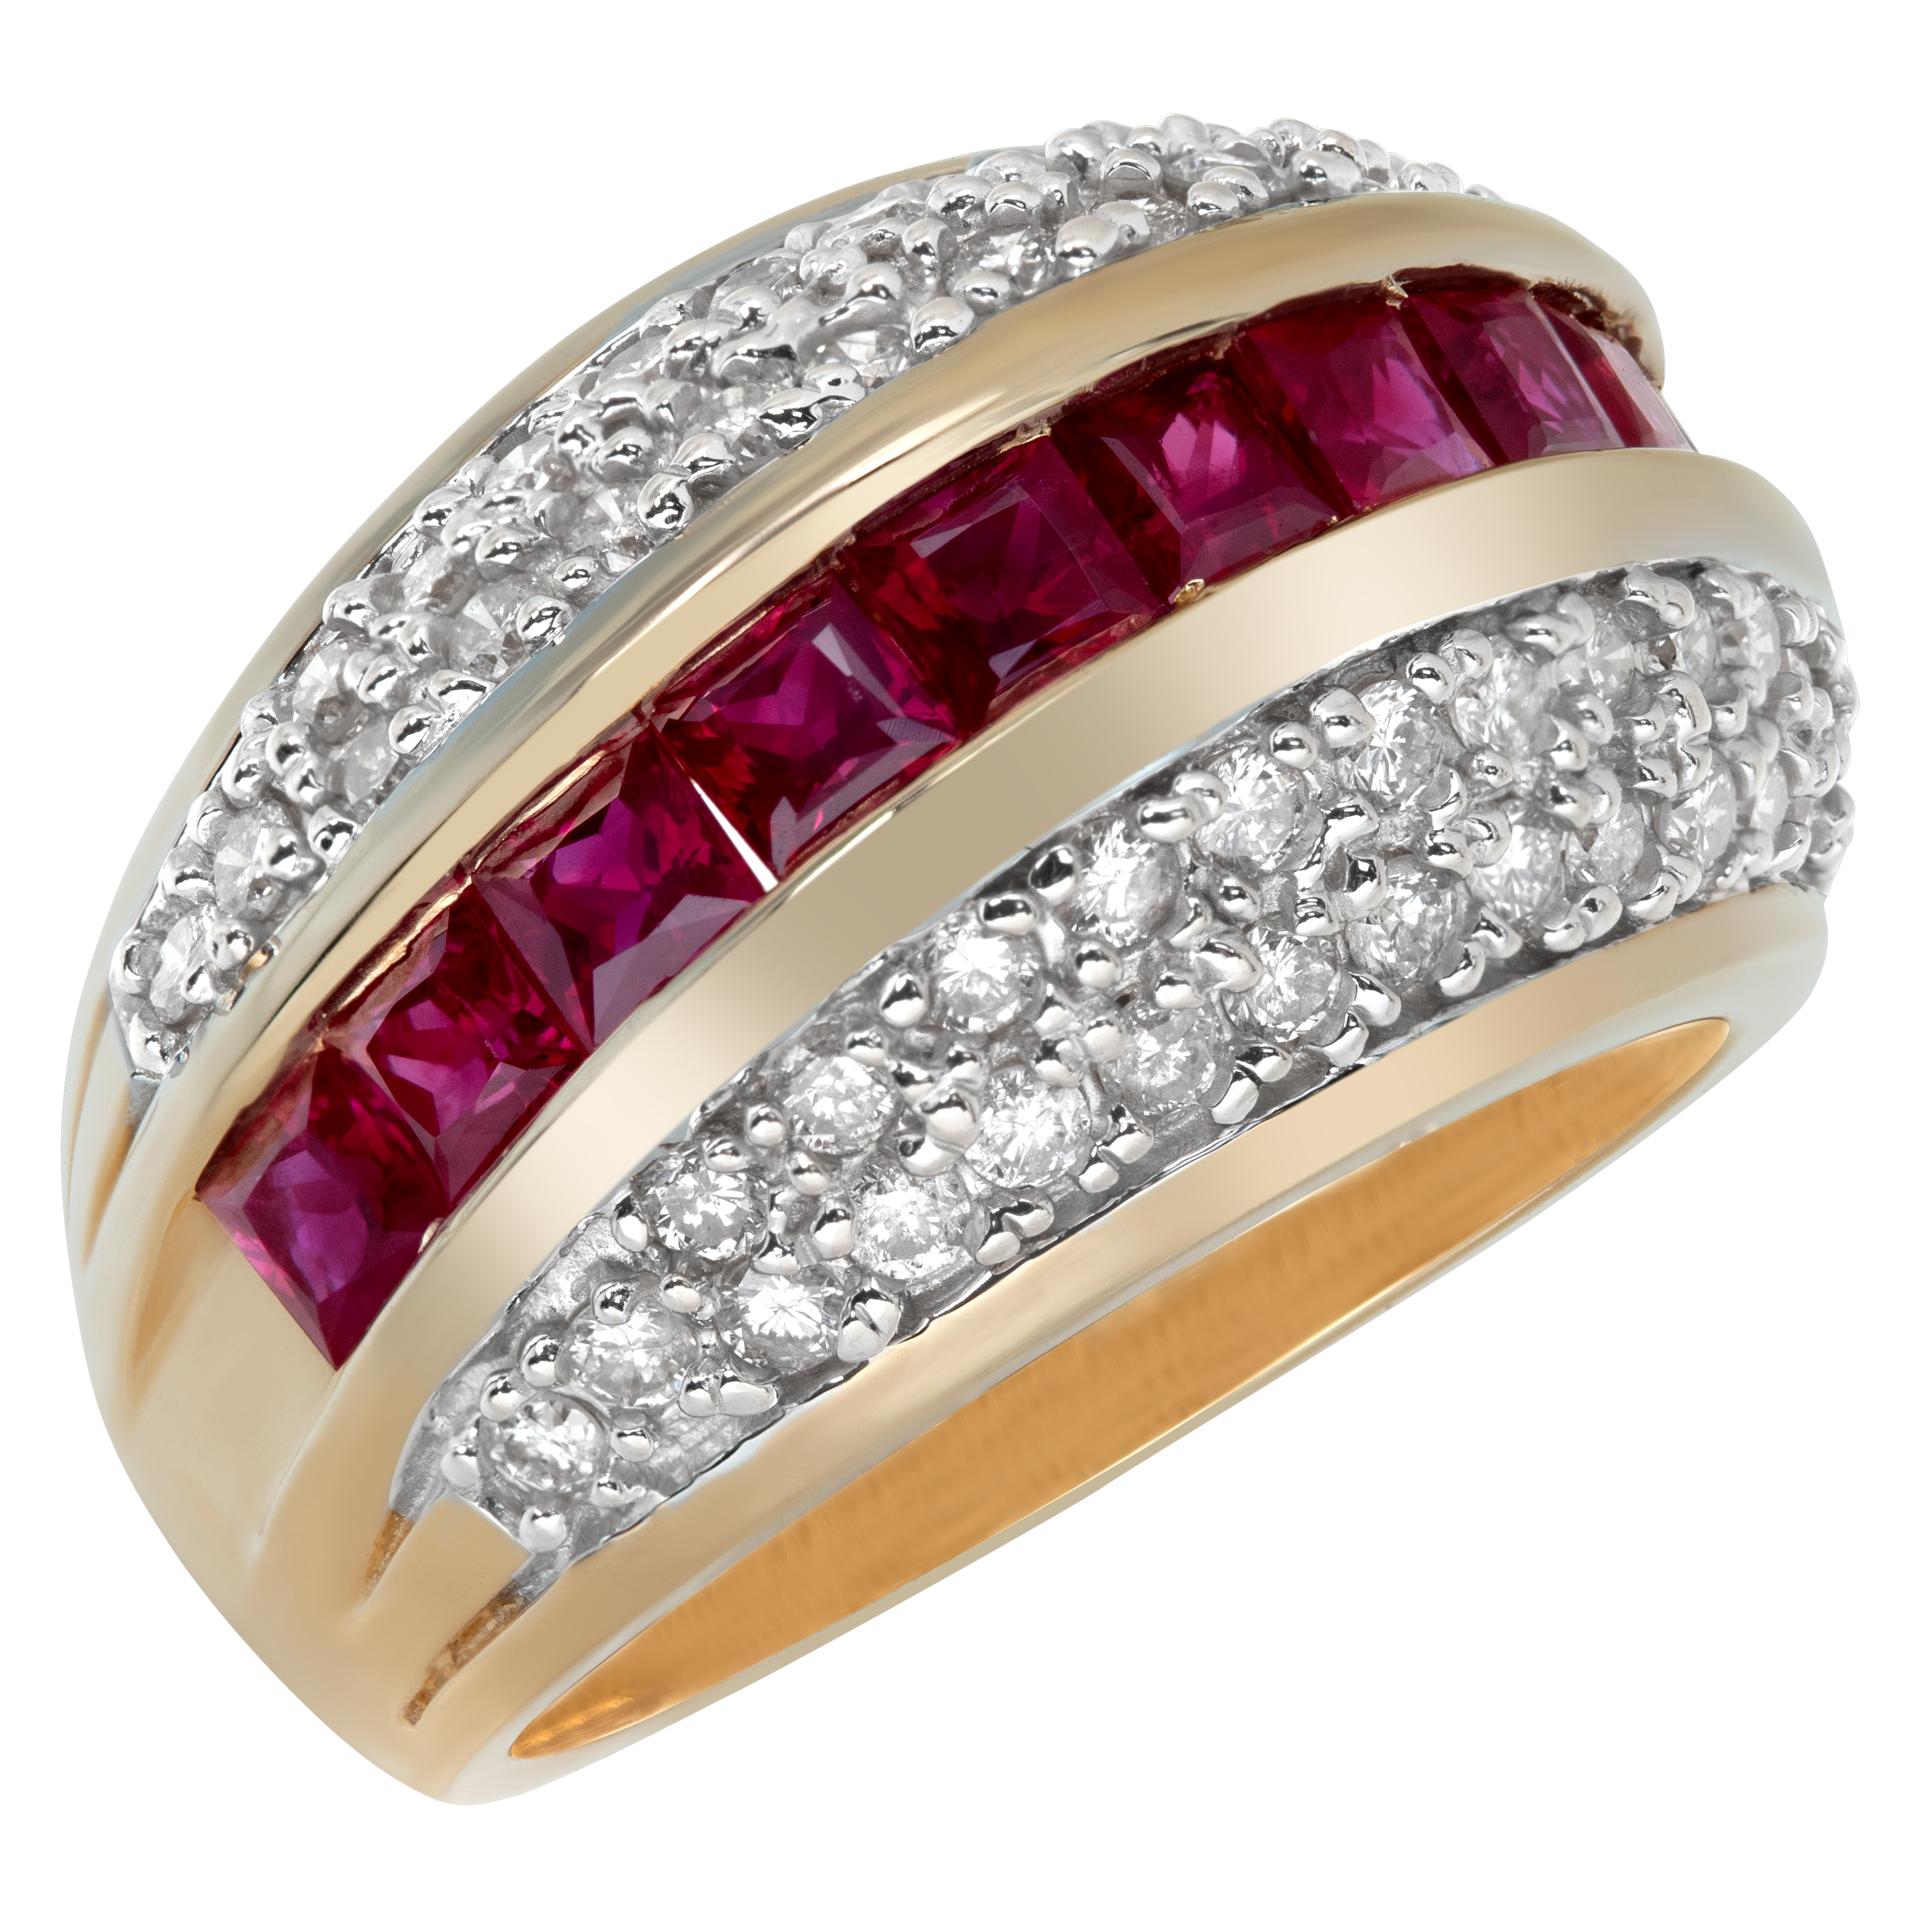 Quad-row diamond ring with channel set rubies in yellow gold In Excellent Condition For Sale In Surfside, FL